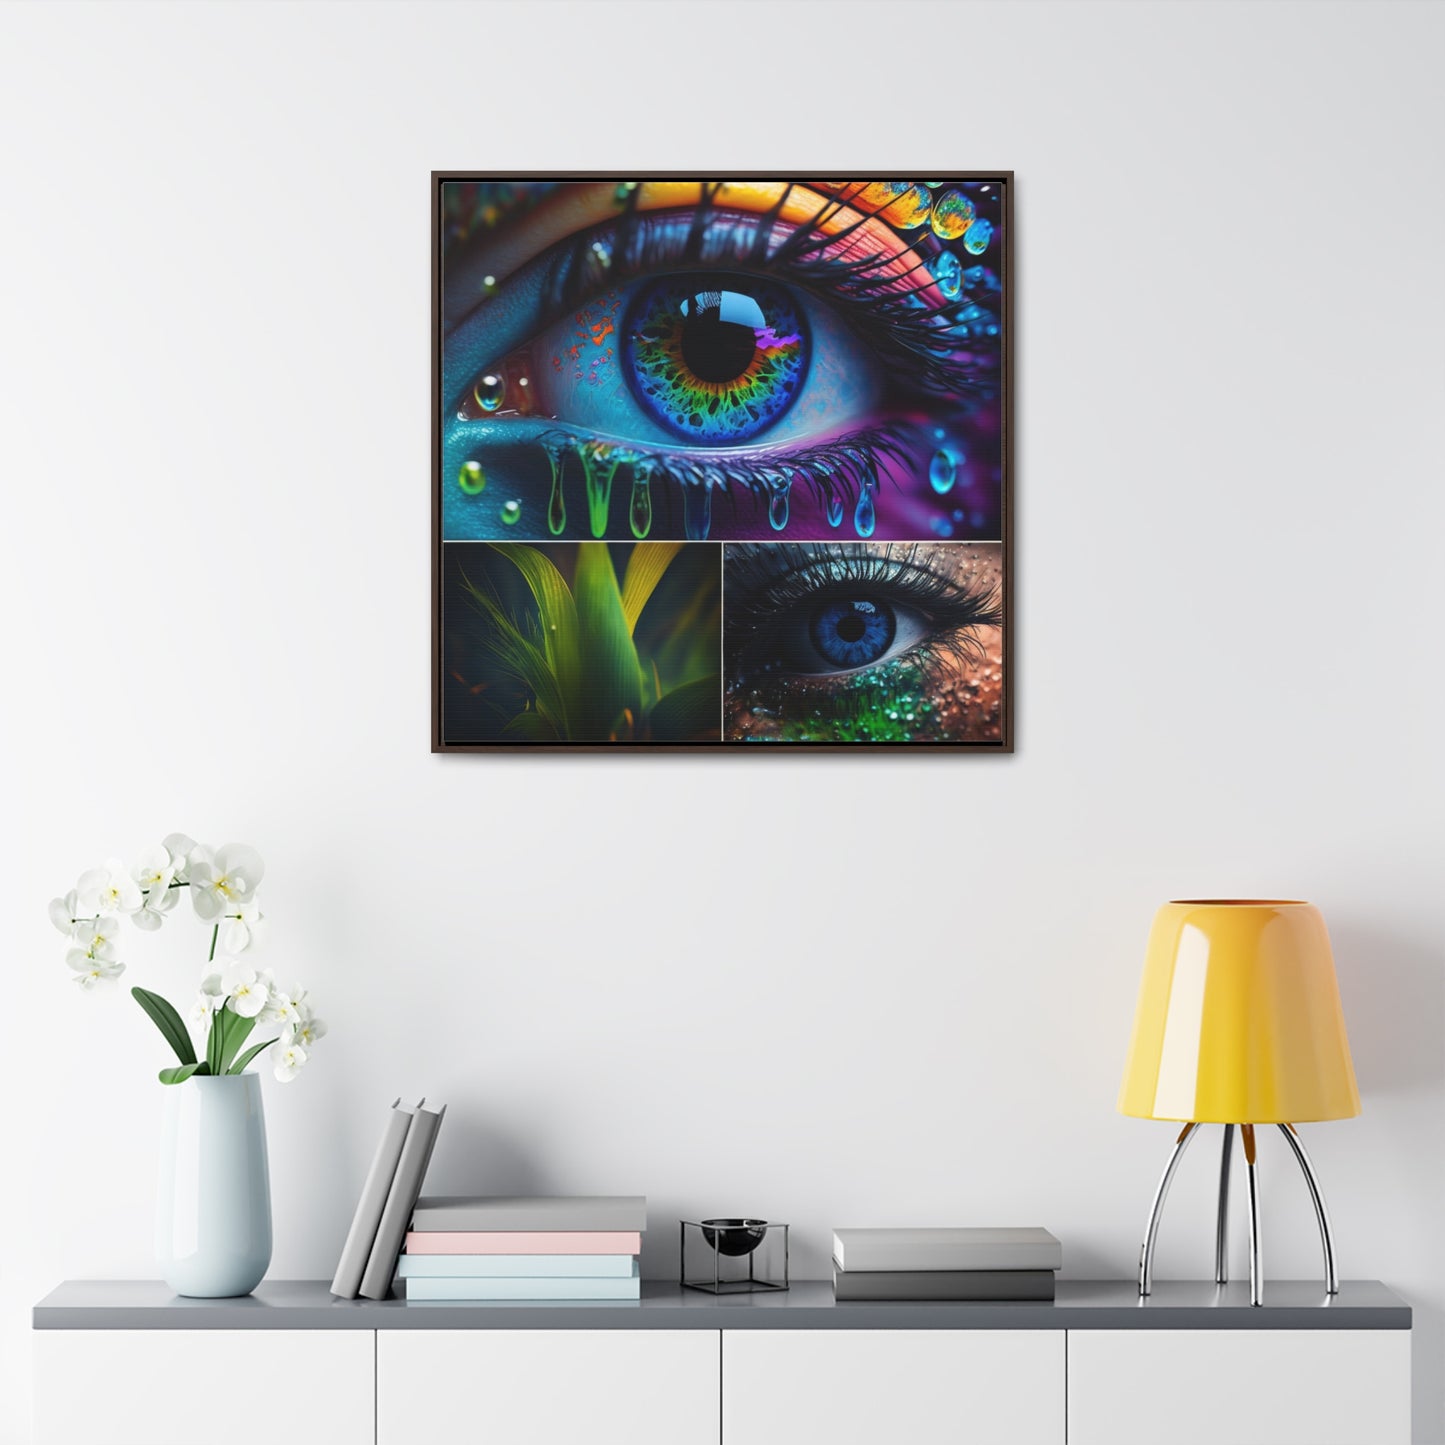 Gallery Canvas Wraps, Square Frame Neon Florescent Glow 3